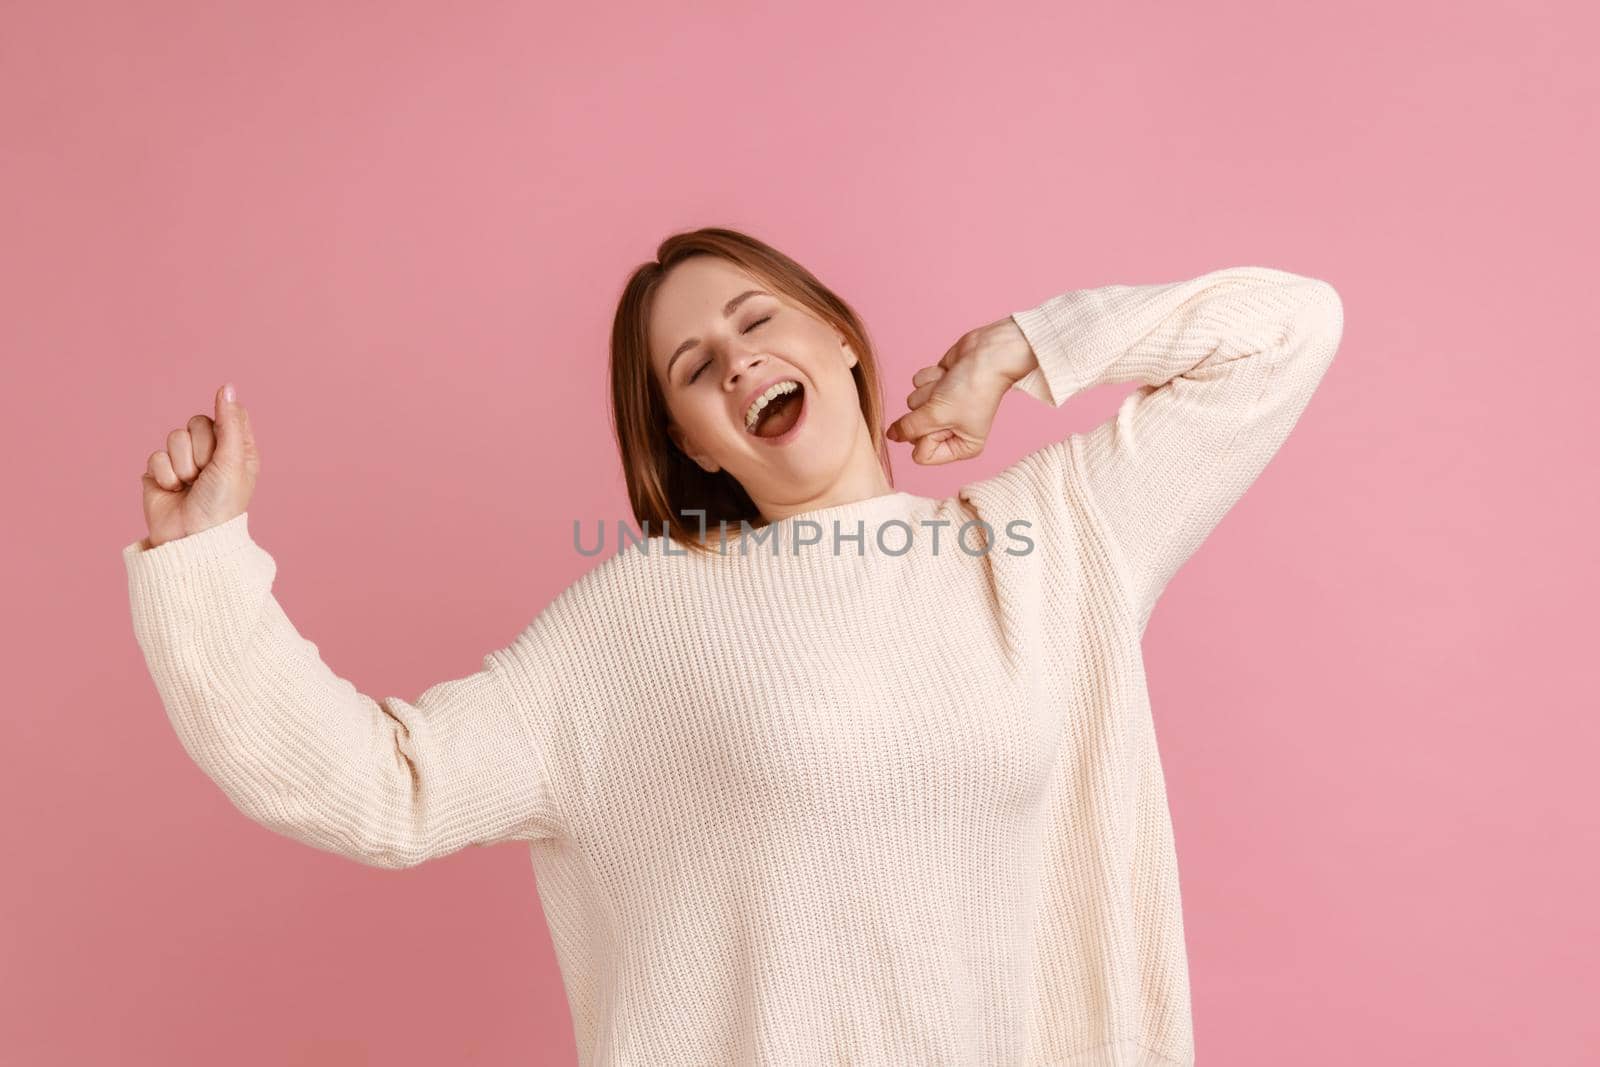 Portrait of sleepy young adult blond woman standing and yawning with closed eyes and raised arms, waking up early, wearing white sweater. Indoor studio shot isolated on pink background.